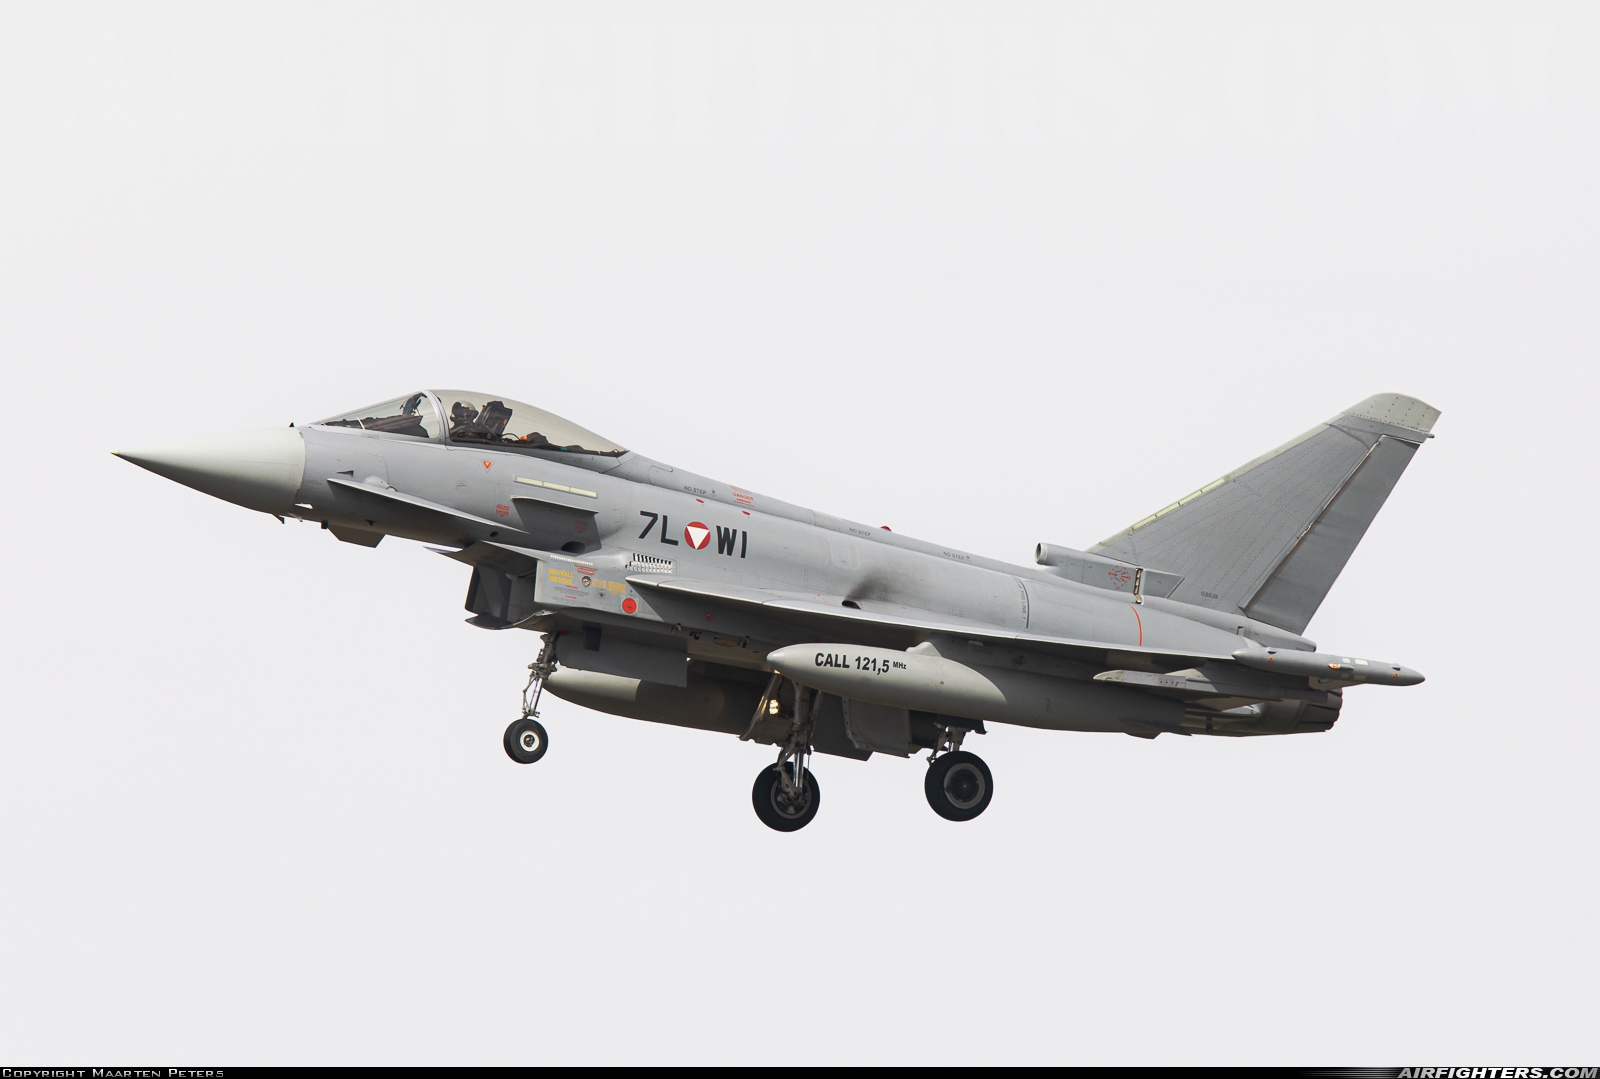 Austria - Air Force Eurofighter EF-2000 Typhoon S 7L-WI at Fairford (FFD / EGVA), UK